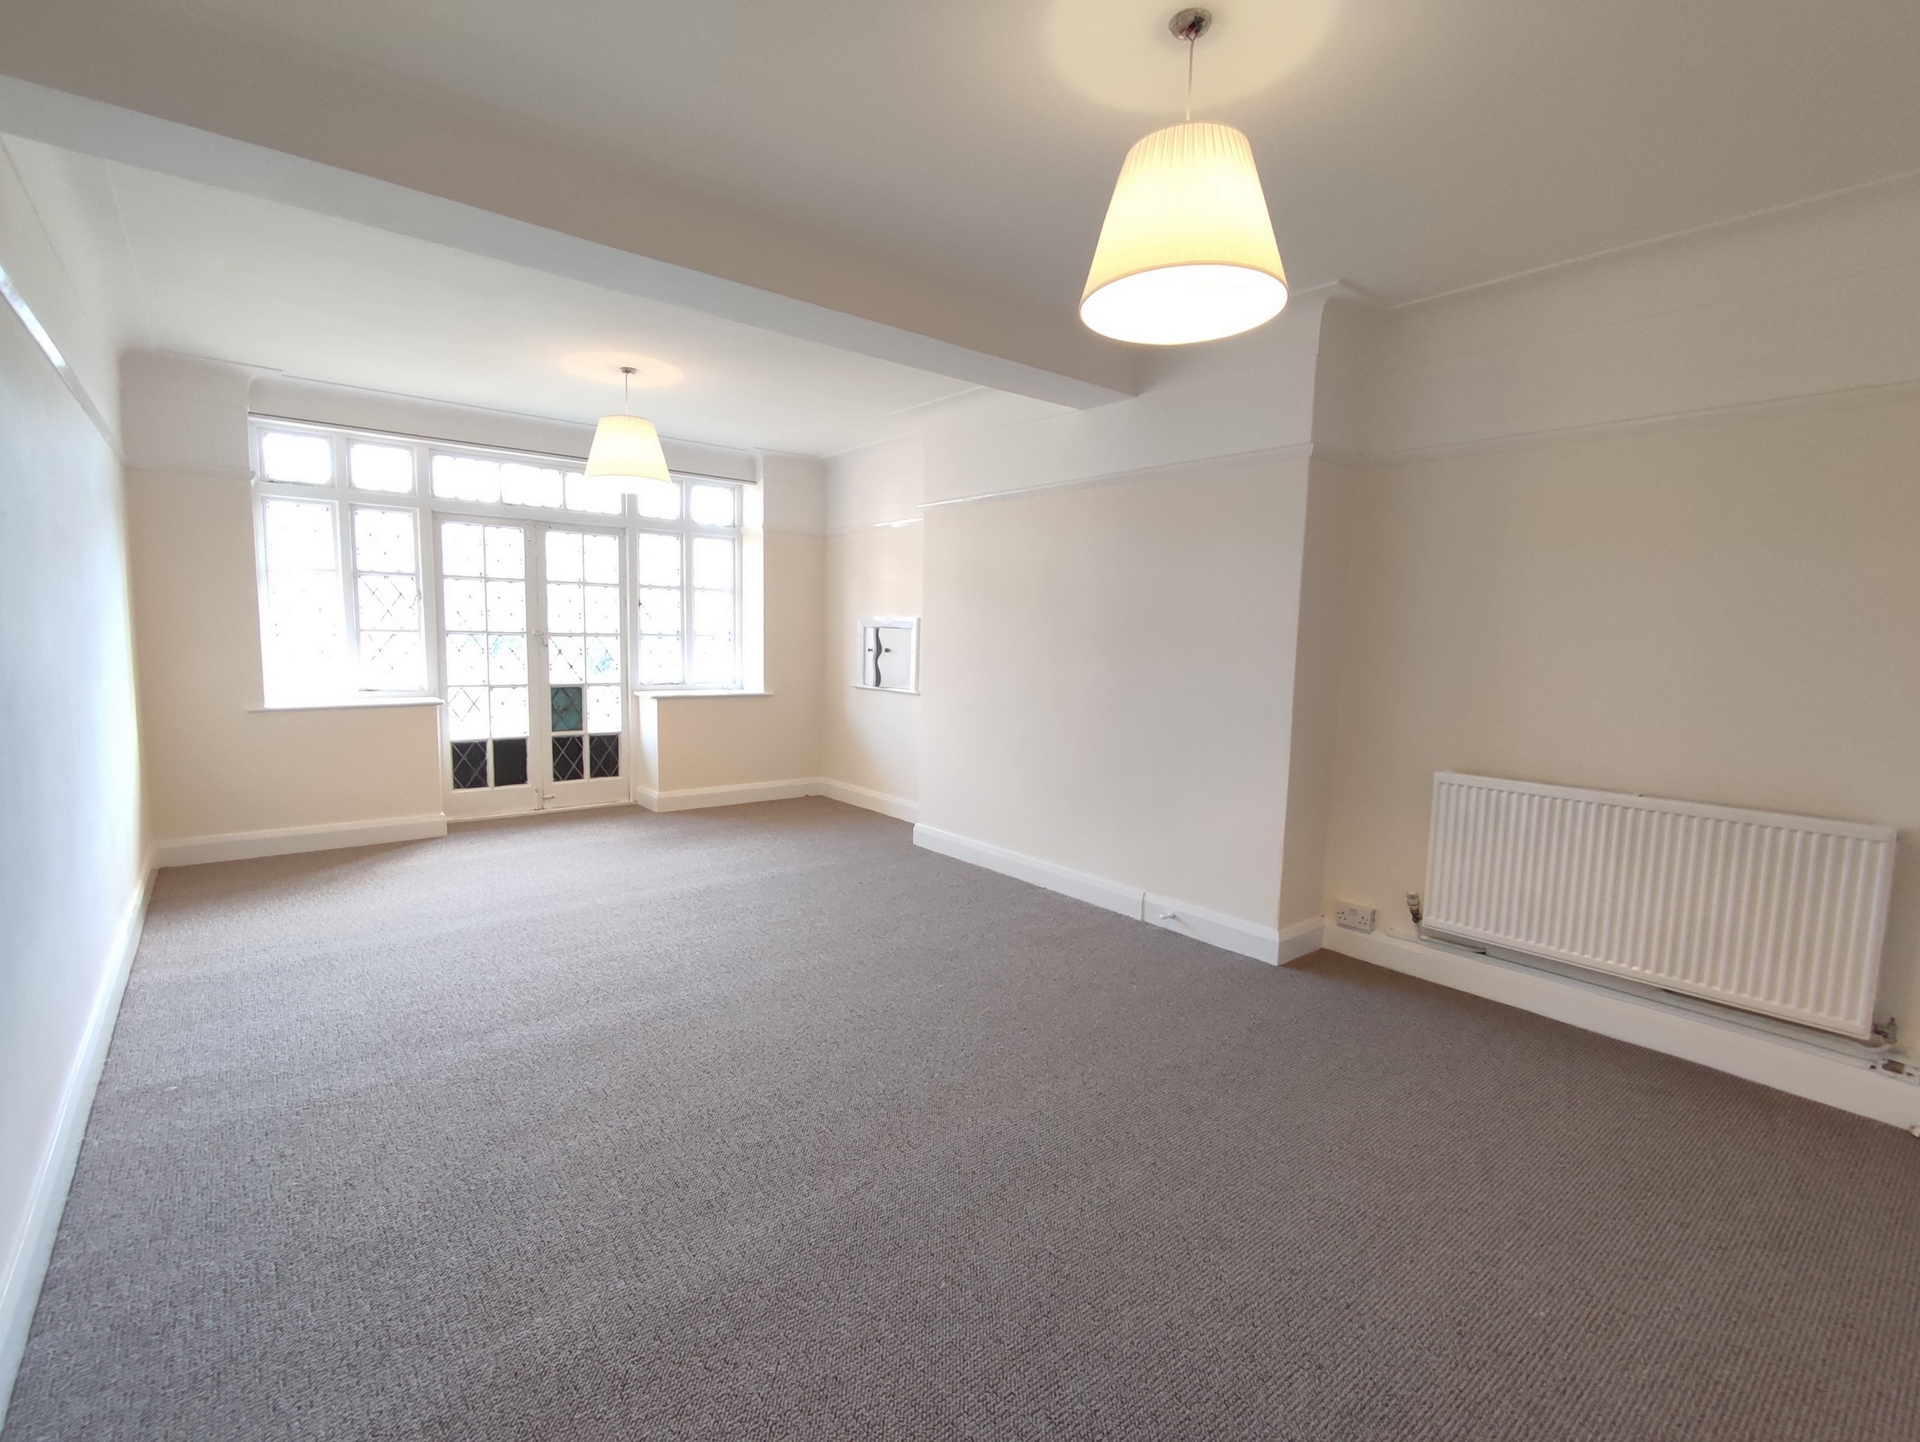 3 bed flat to rent in Surrey Road, Margate - Property Image 1